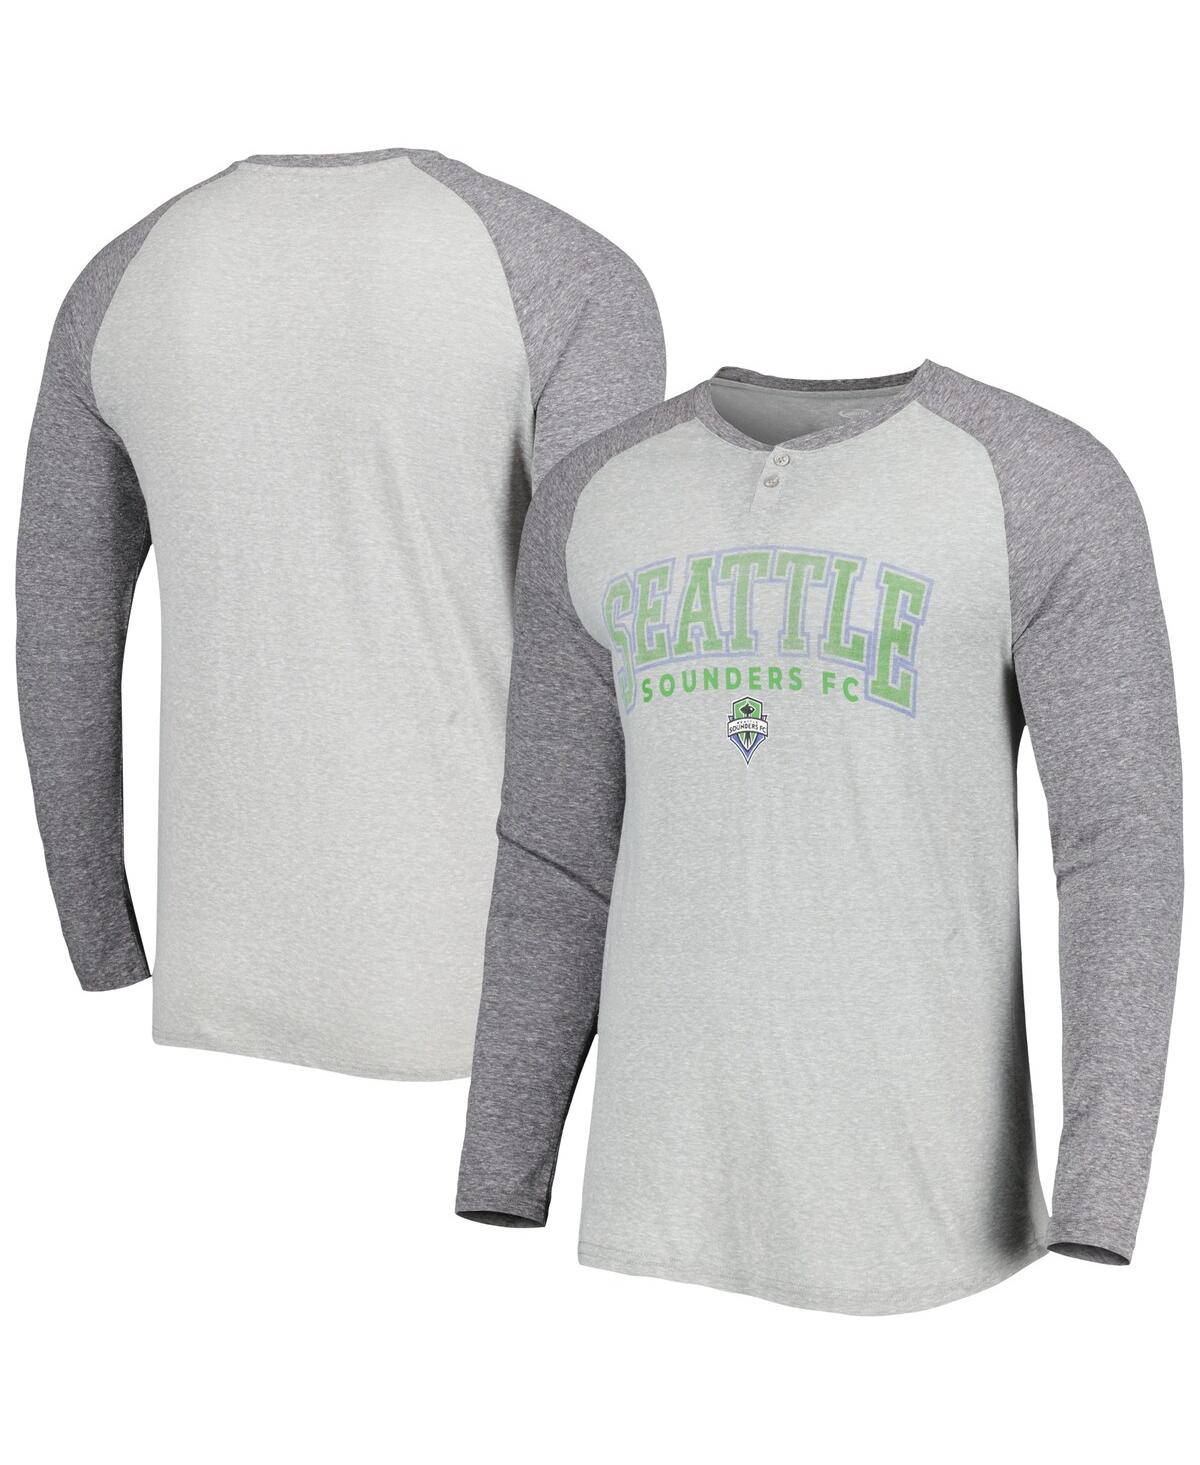 Concepts Sport Men's  Heathered Gray, Heathered Charcoal Seattle Sounders Fc Ledger Raglan Long Sleev In Heathered Gray,heathered Charcoal